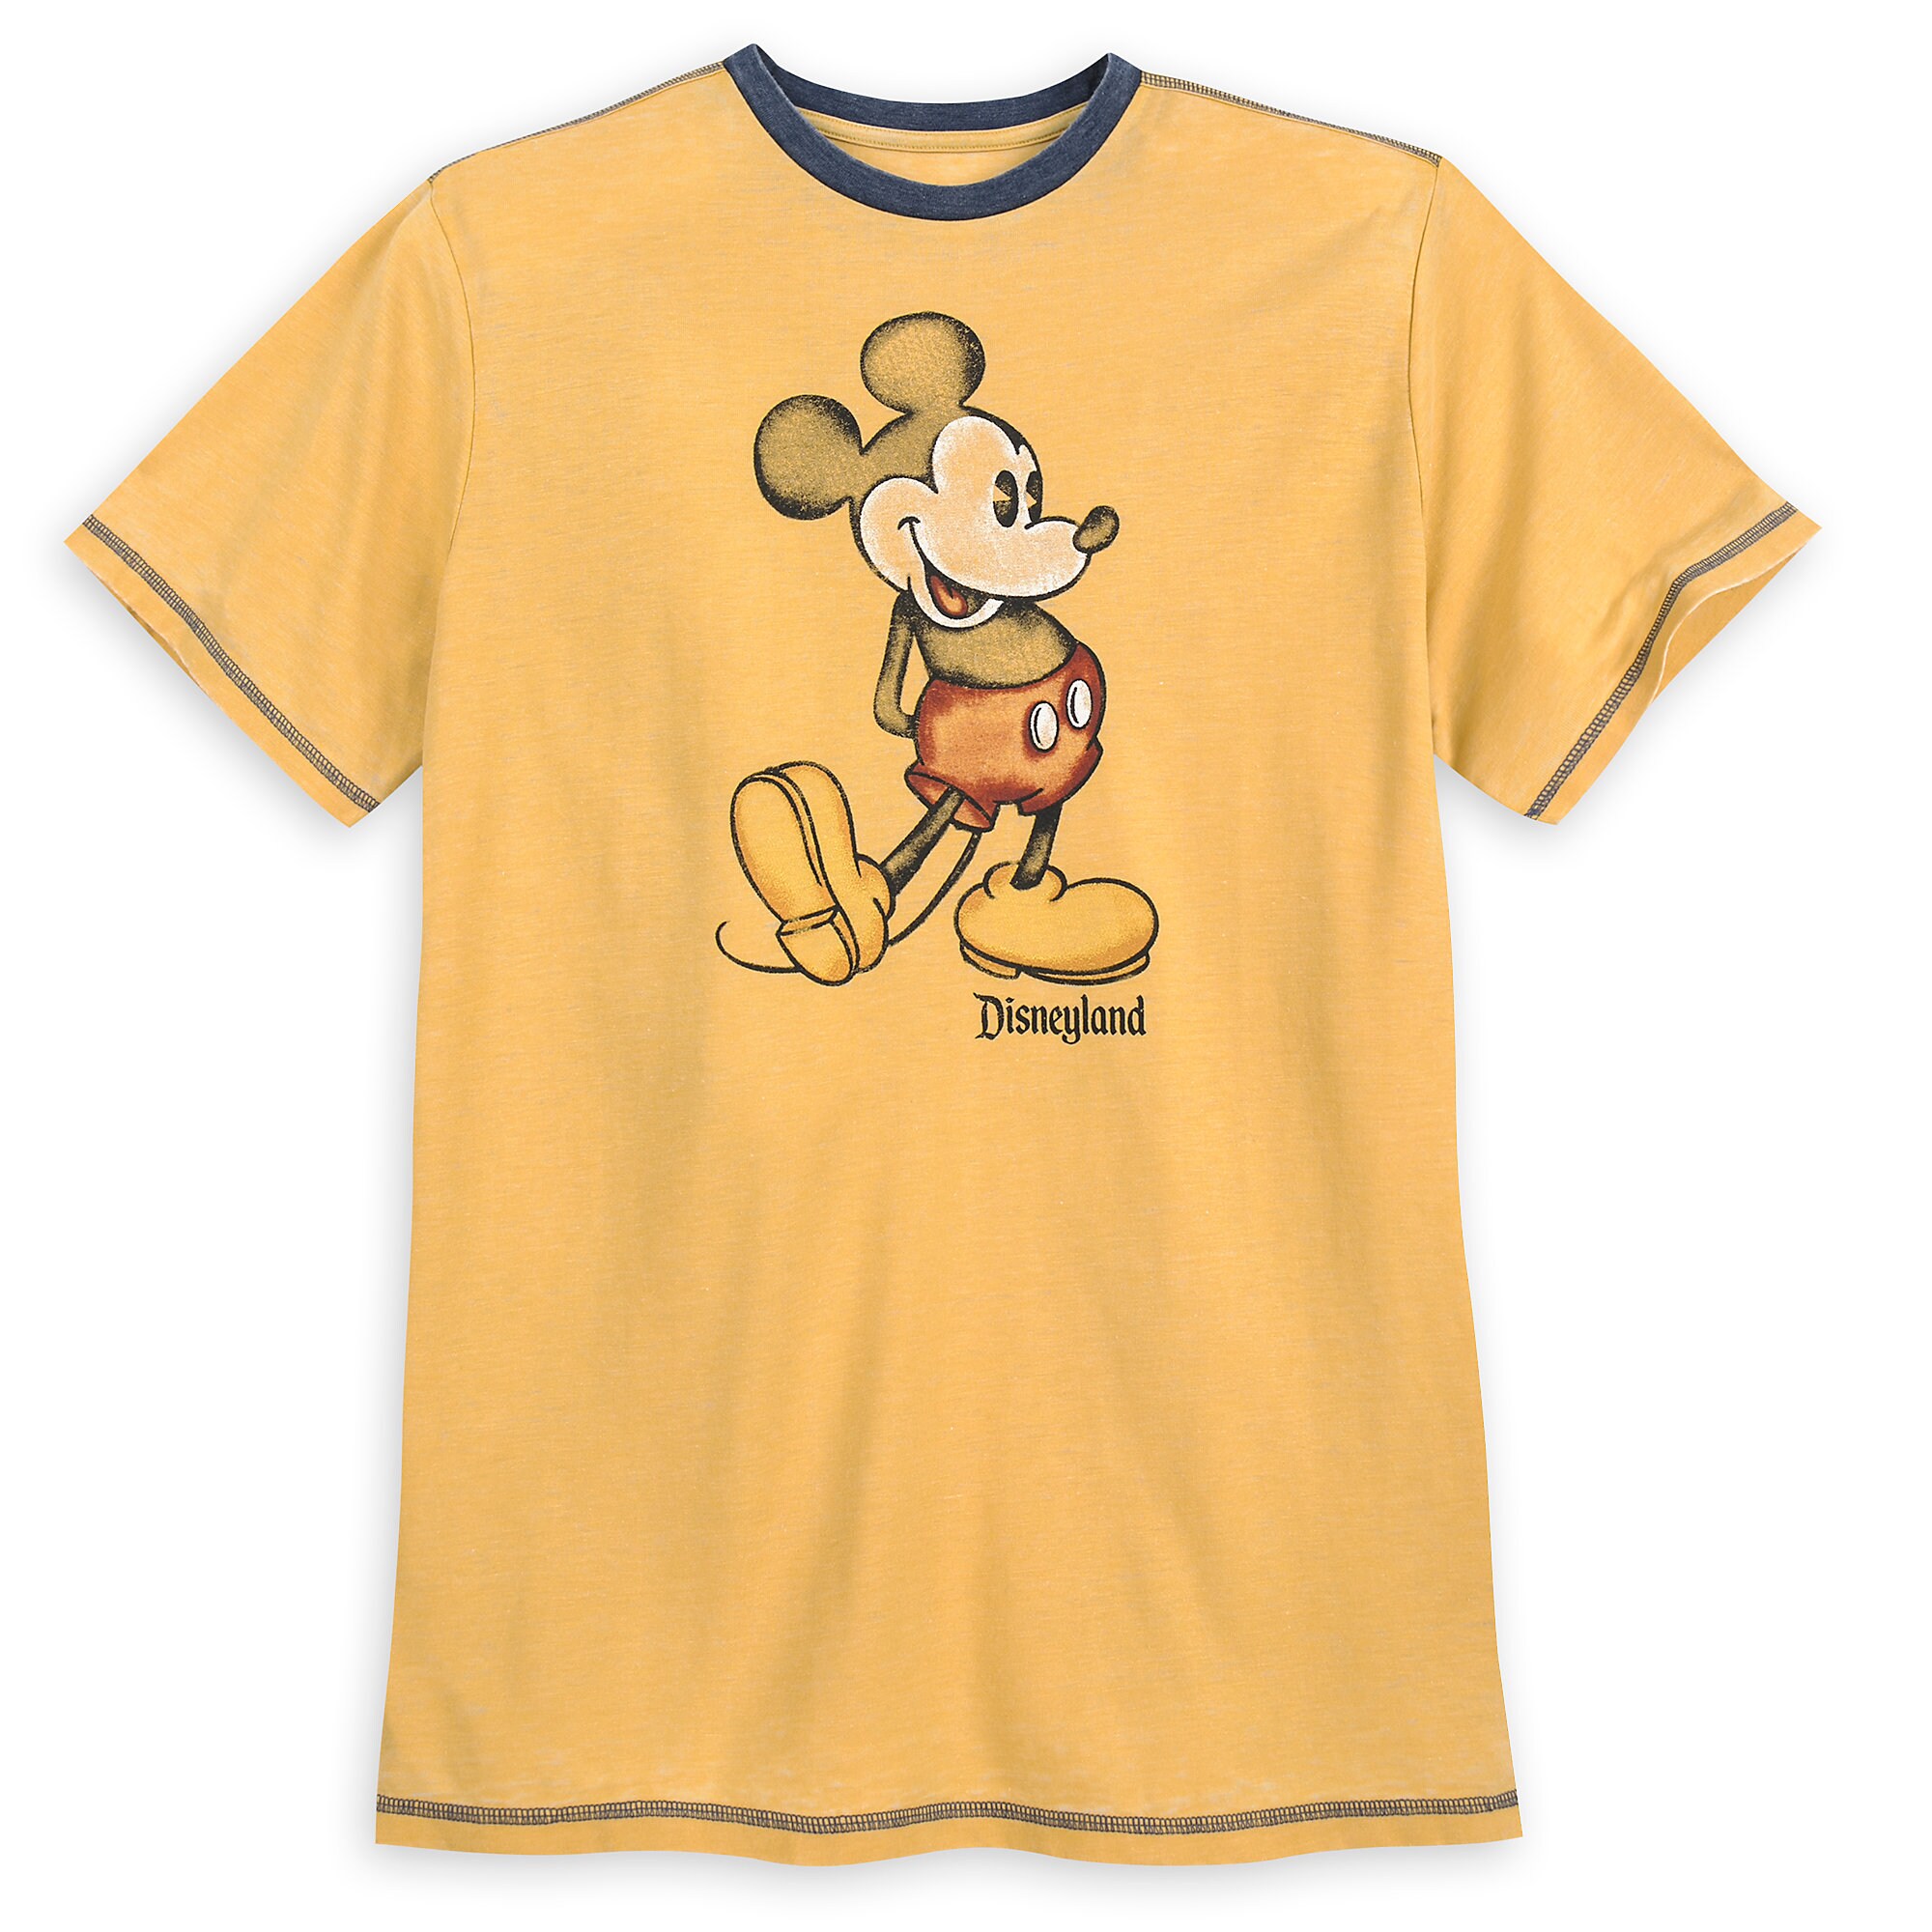 Mickey Mouse Classic Ringer T-Shirt for Men - Disneyland - Yellow